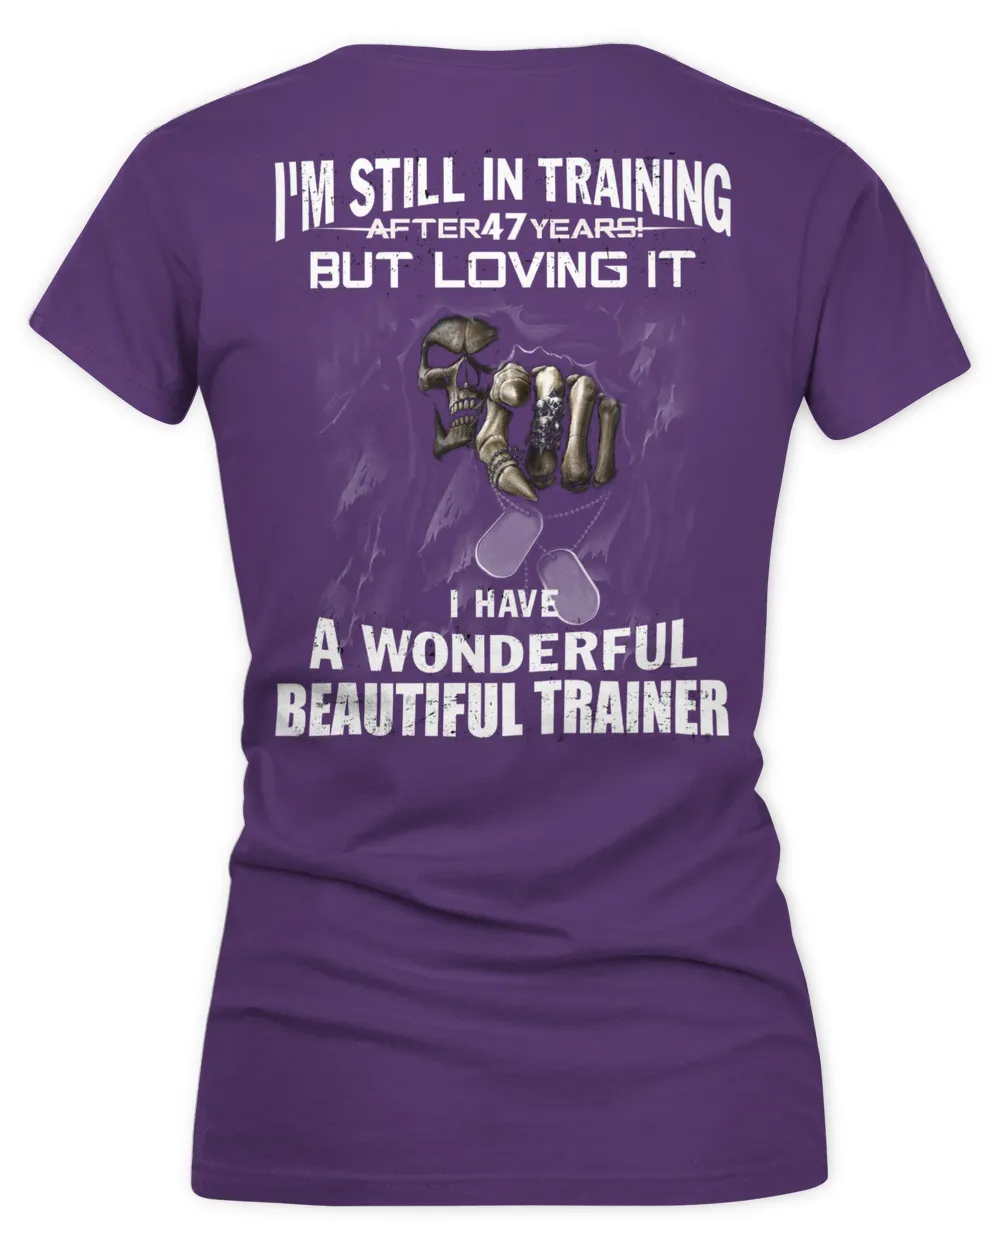 FATHER'S DAY GIFT - FUNNY GIFT FOR HUSBAND,FRIENDS, UNCLE - I'M STILL IN TRAINING AFTER ... YEAR ! BUT LOVING IT. I HAVE A WONDERFUL, BEAUTIFUL TRAINER